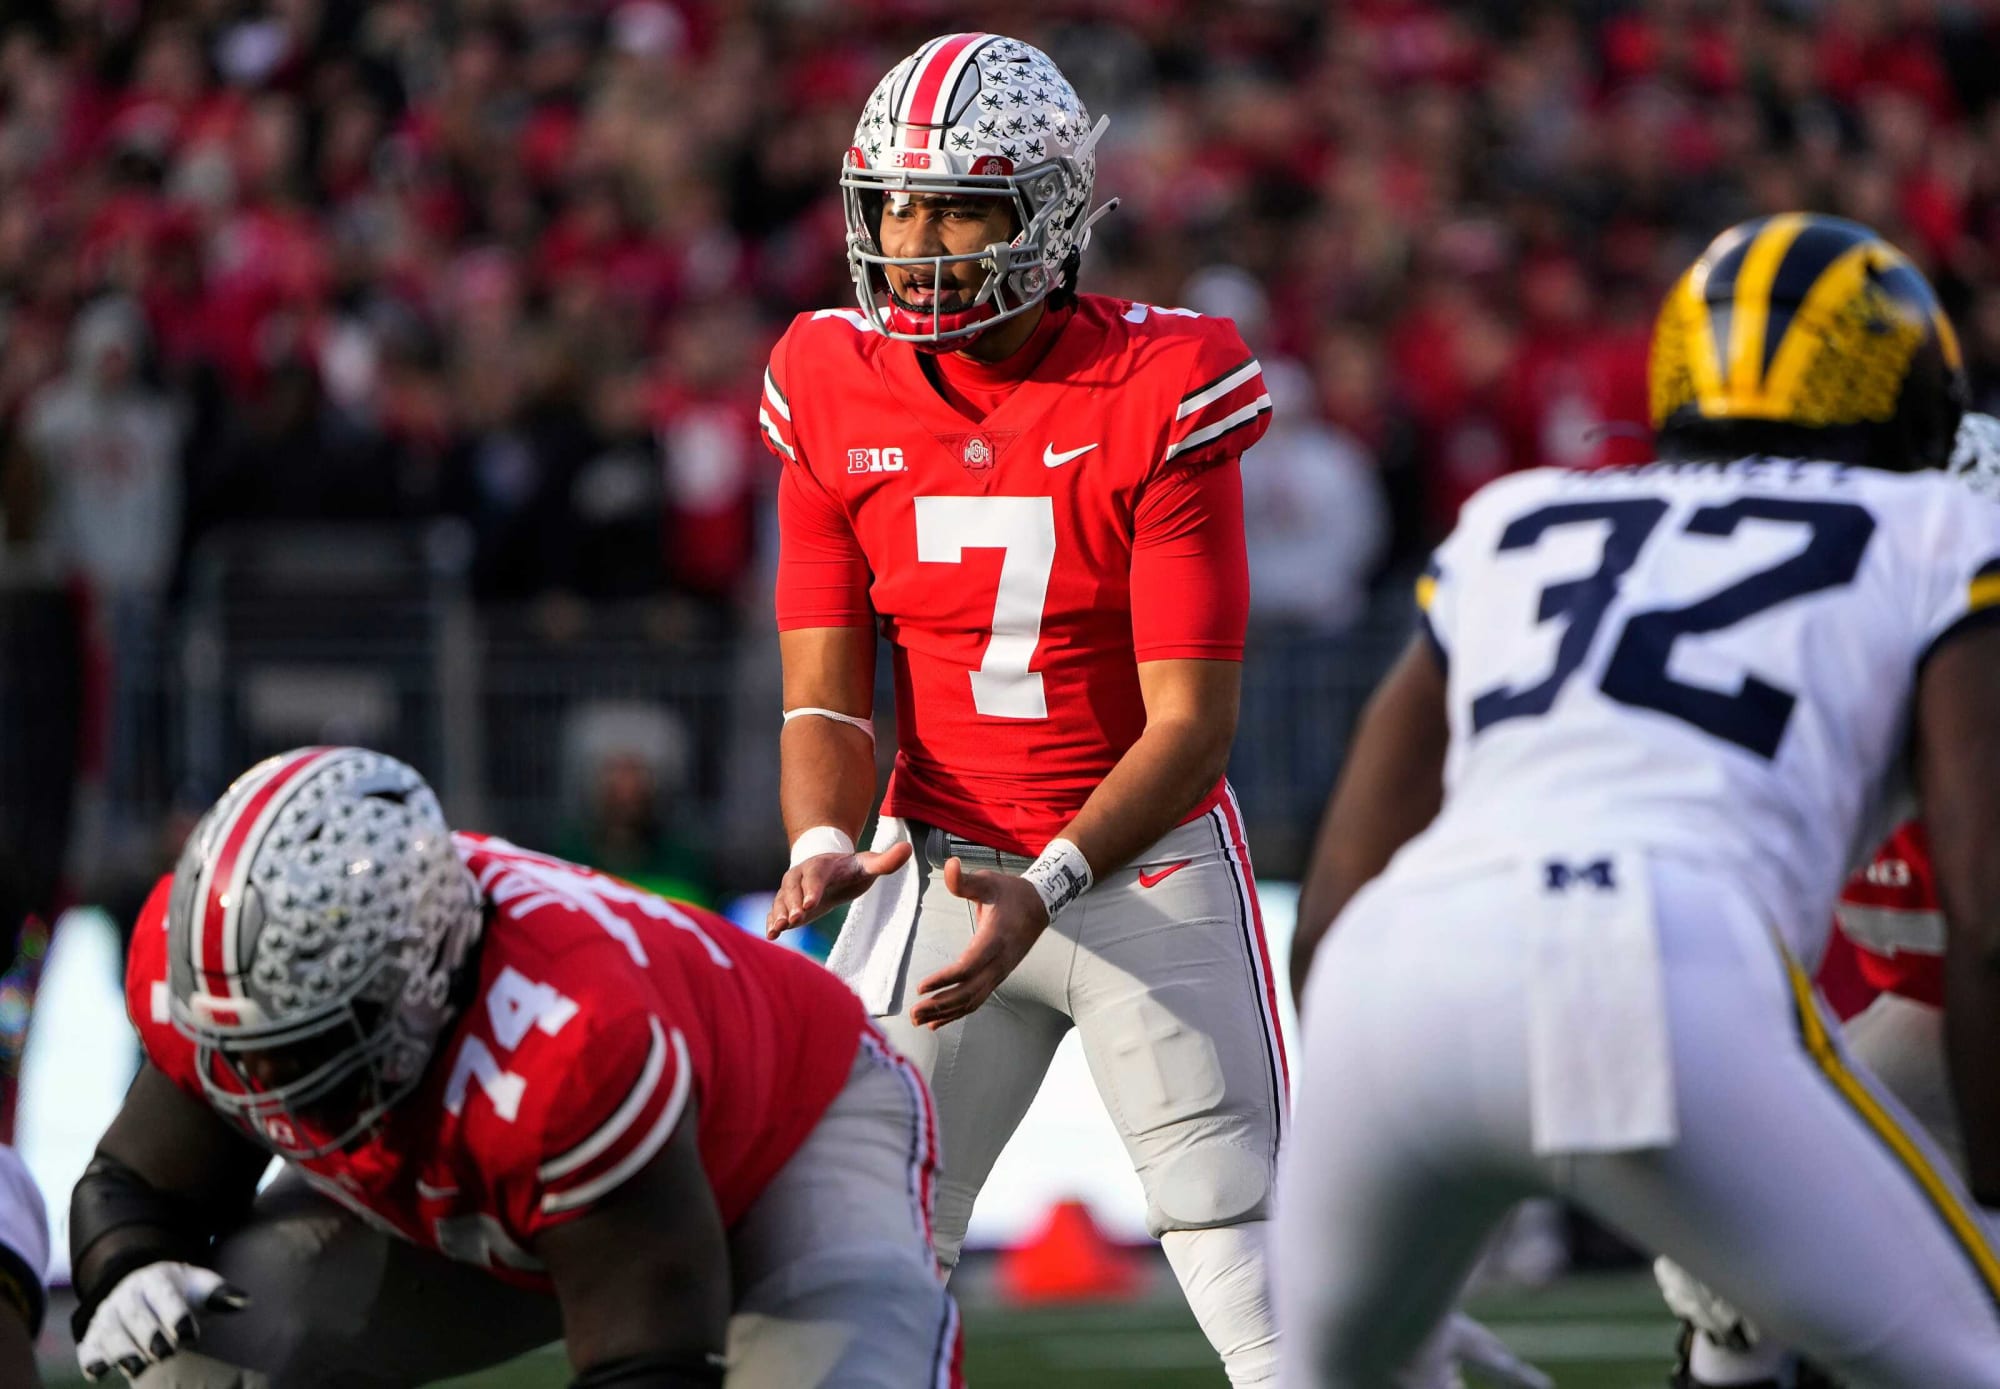 Ohio State Football C.J. Stroud's odds to win the Heisman Trophy